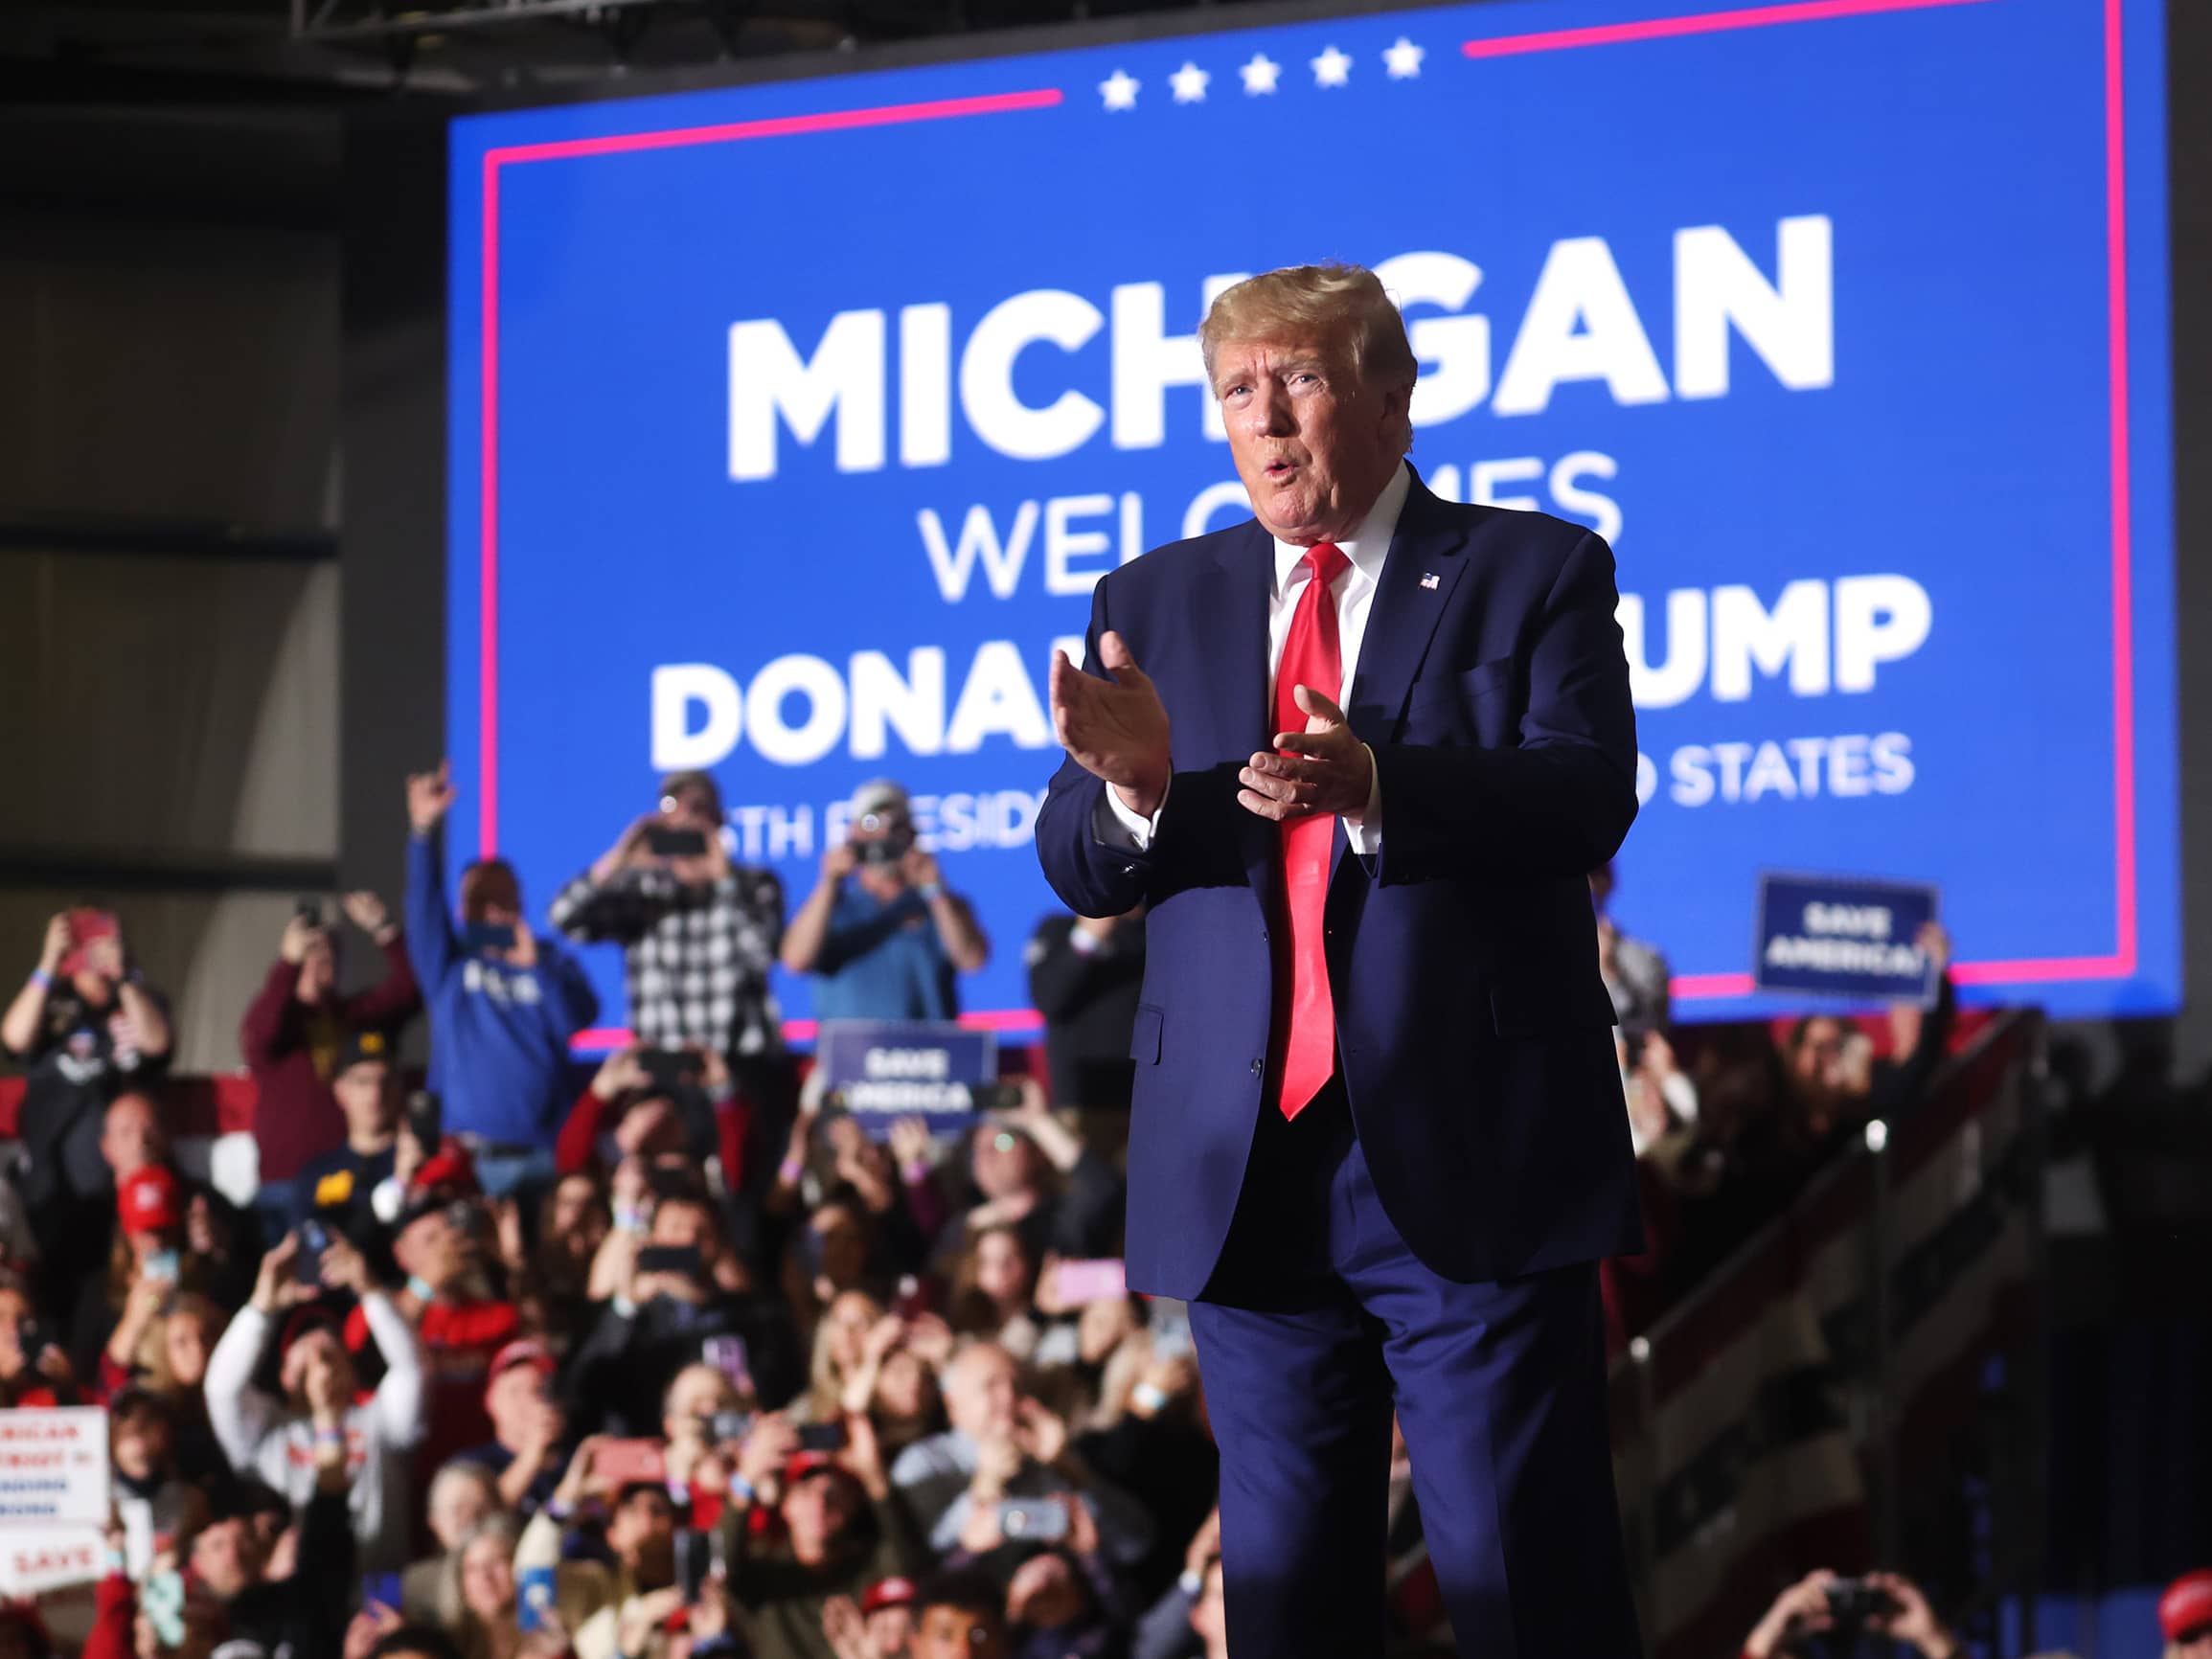 Trump calls out the judge who fined him at the Michigan rally (Credits: NPR)